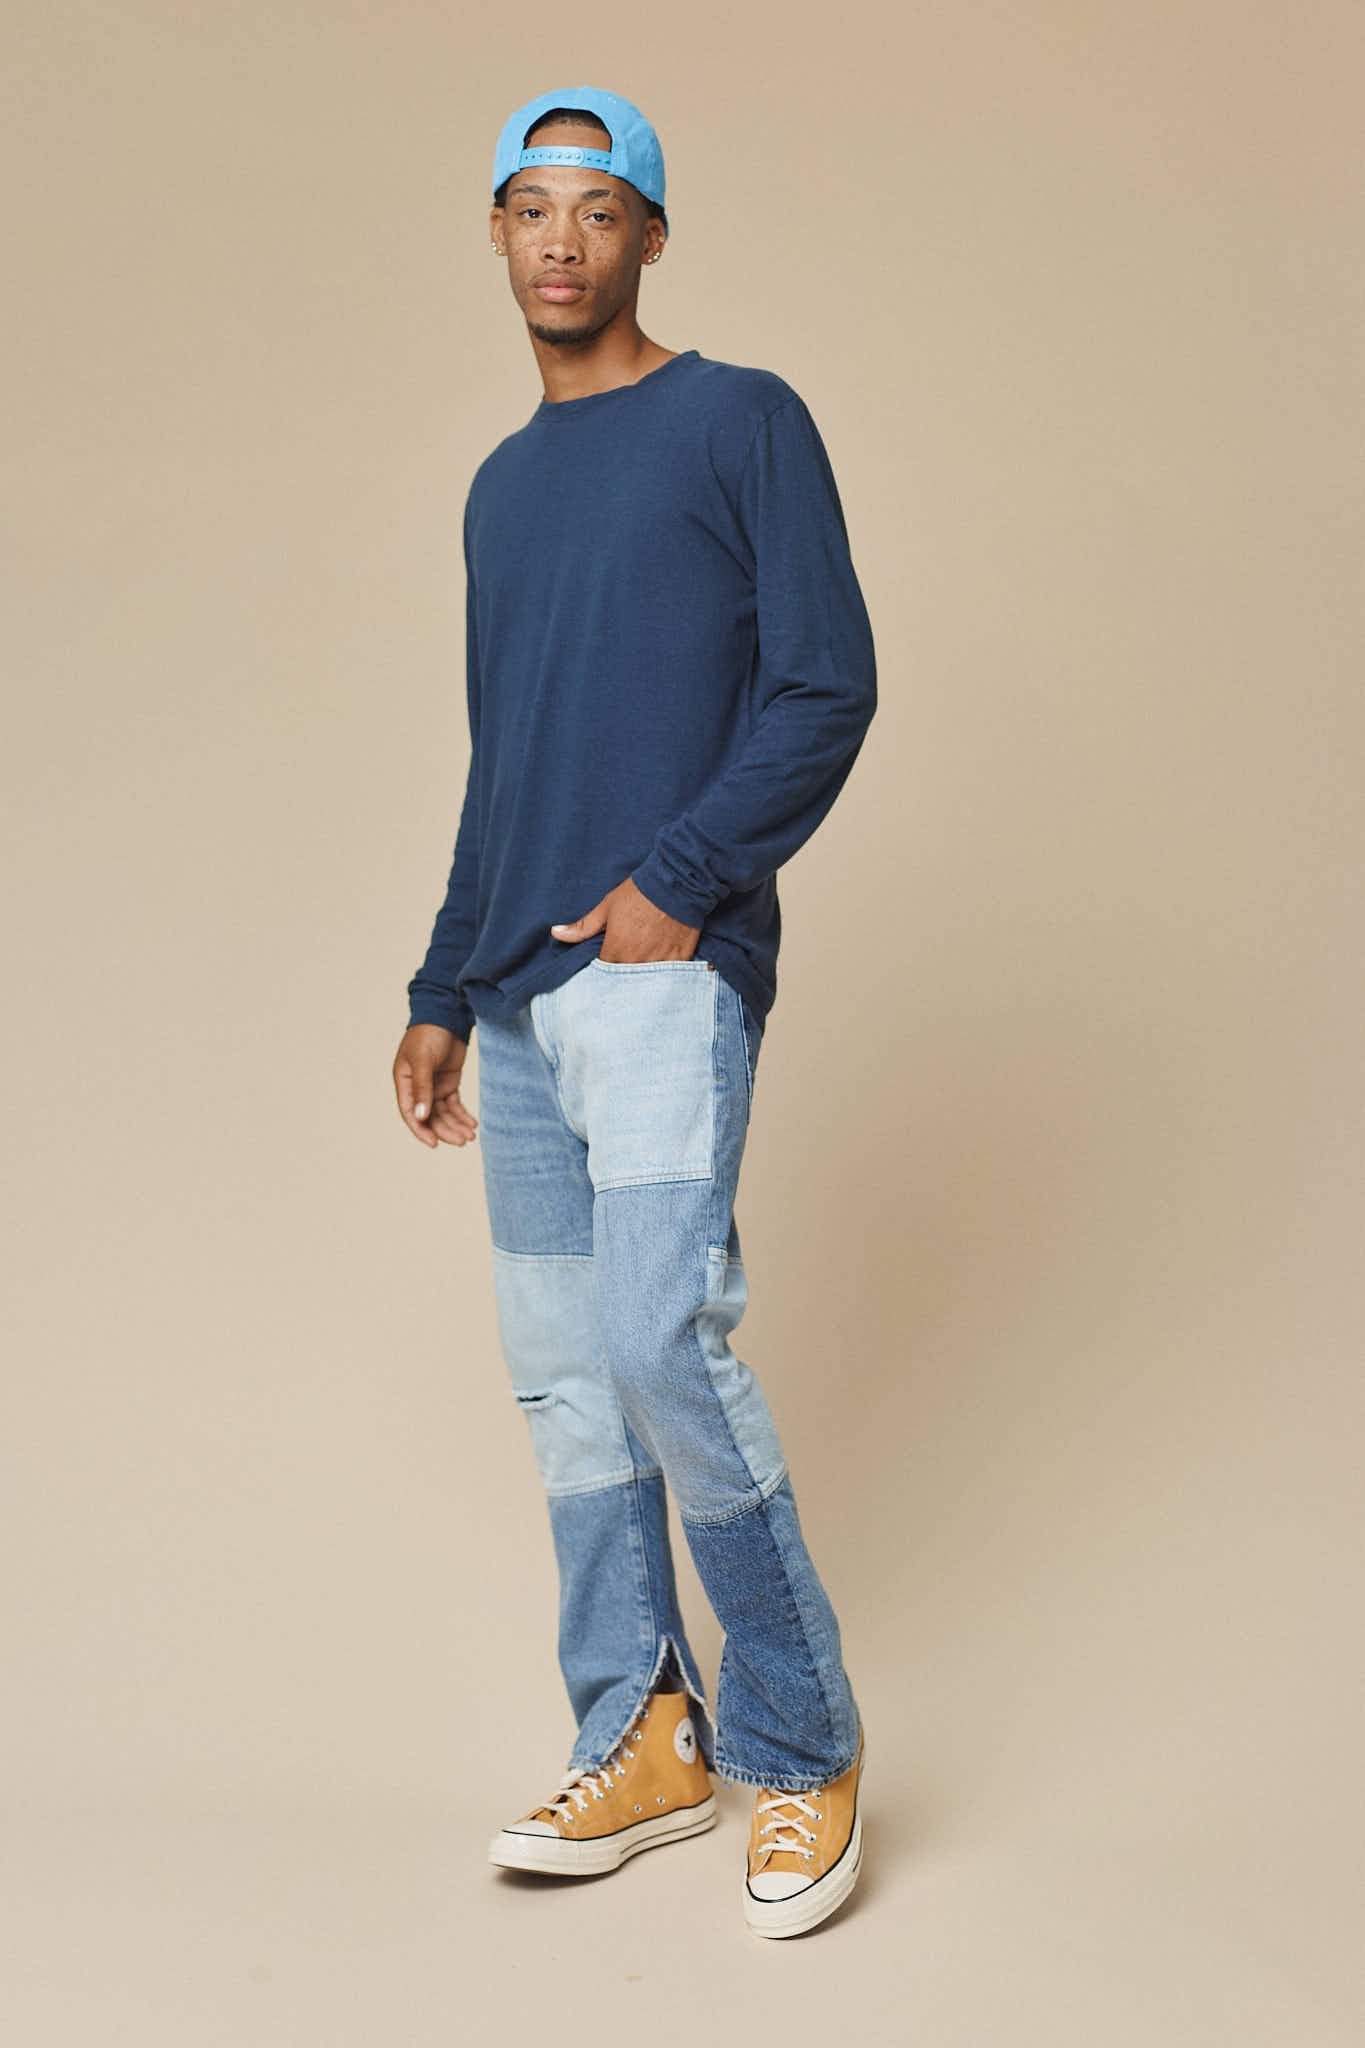 Made To Order Patchworked Portrait Denim Pants - Men - Ready-to-Wear